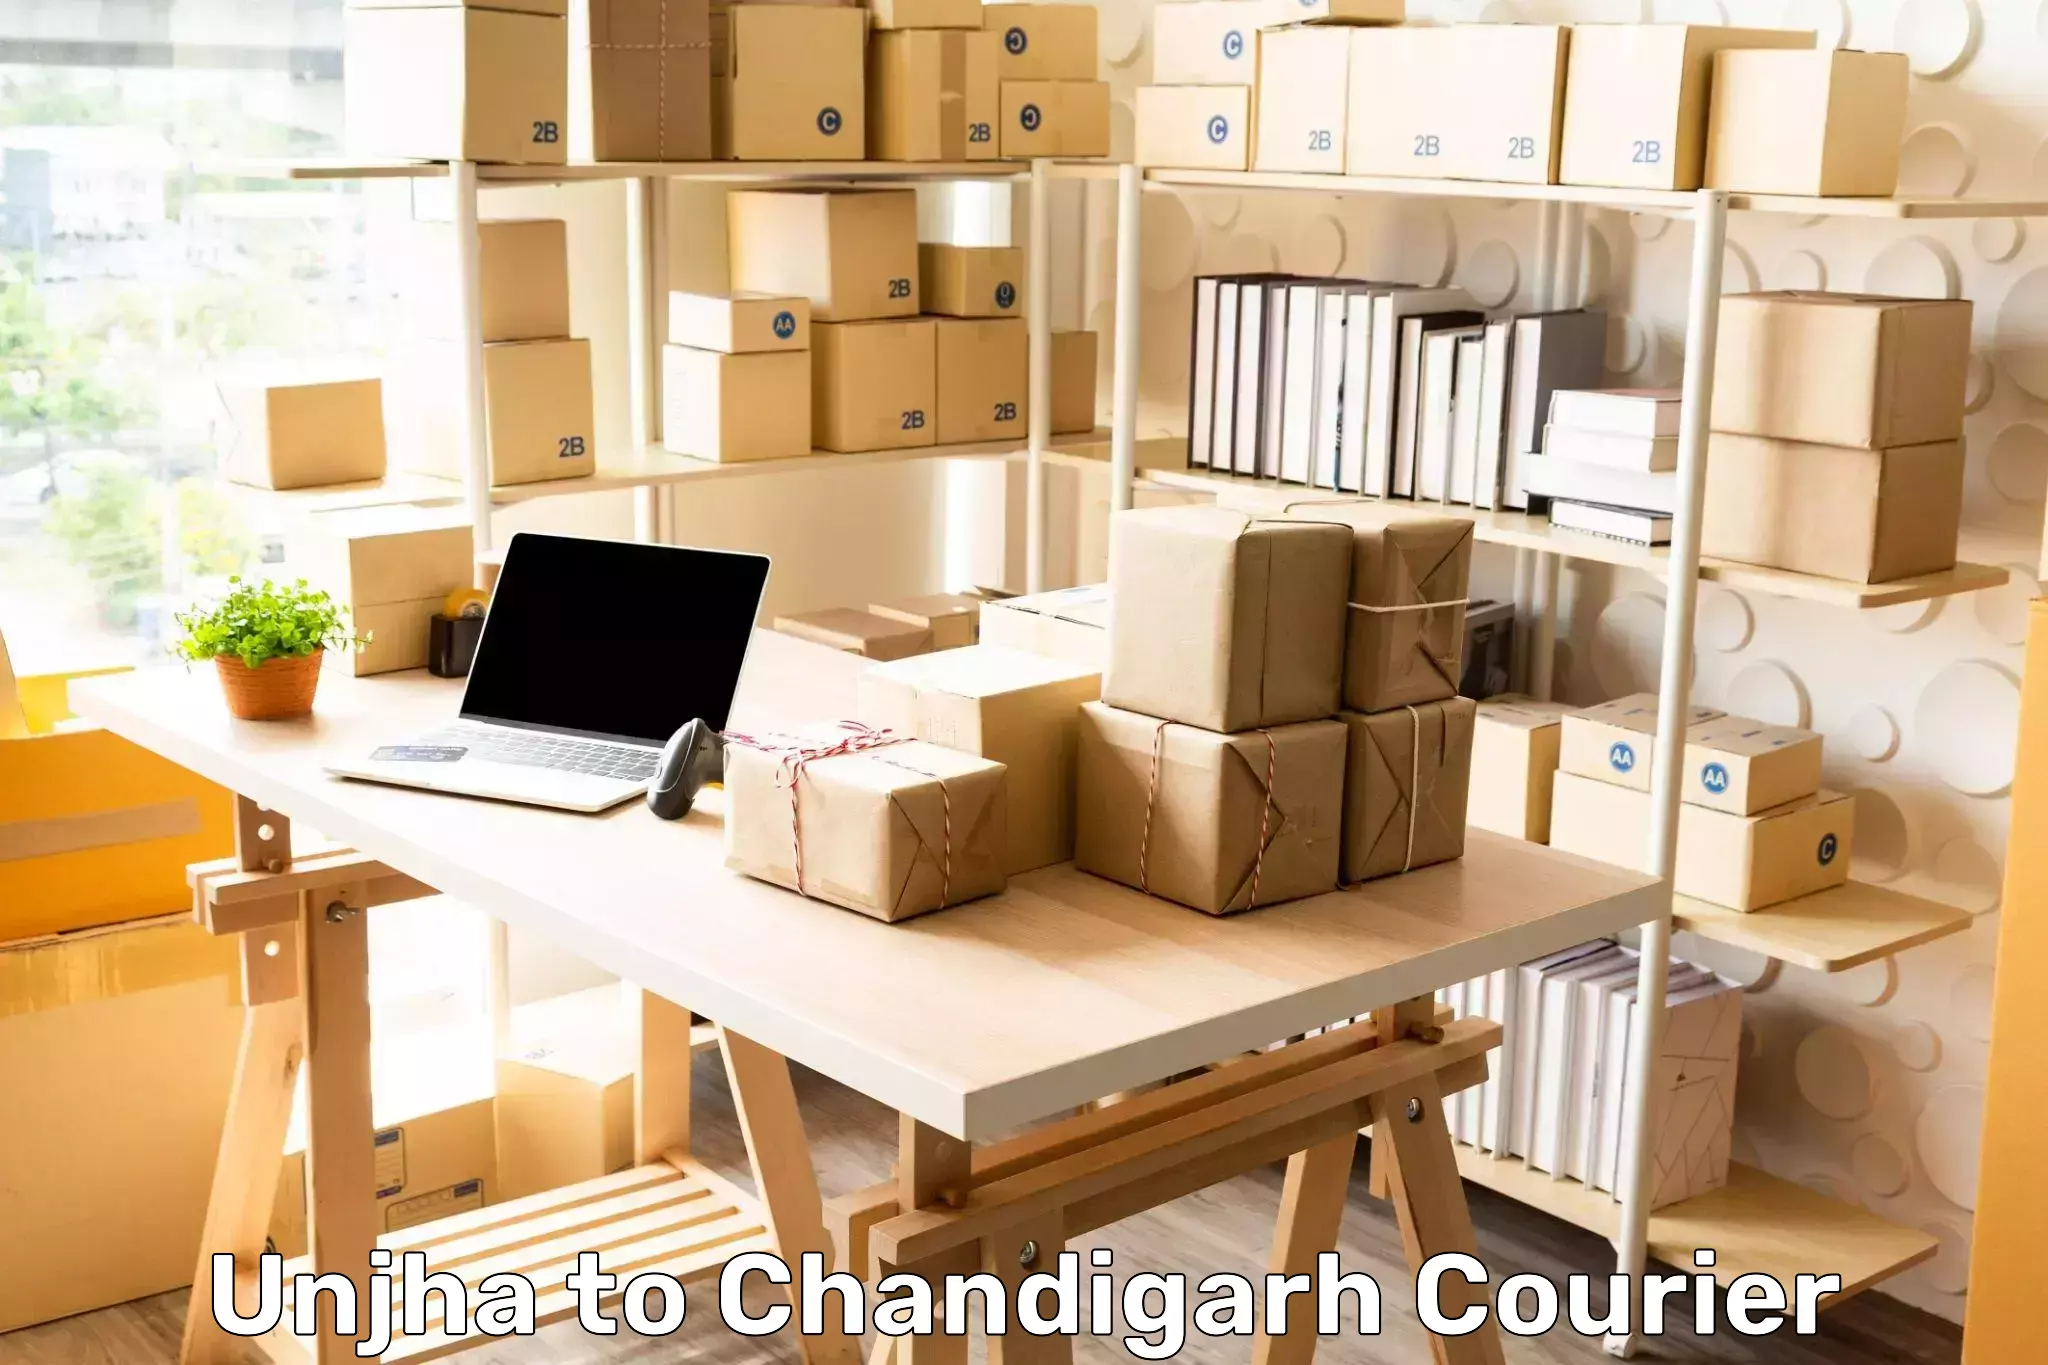 Return courier service in Unjha to Chandigarh